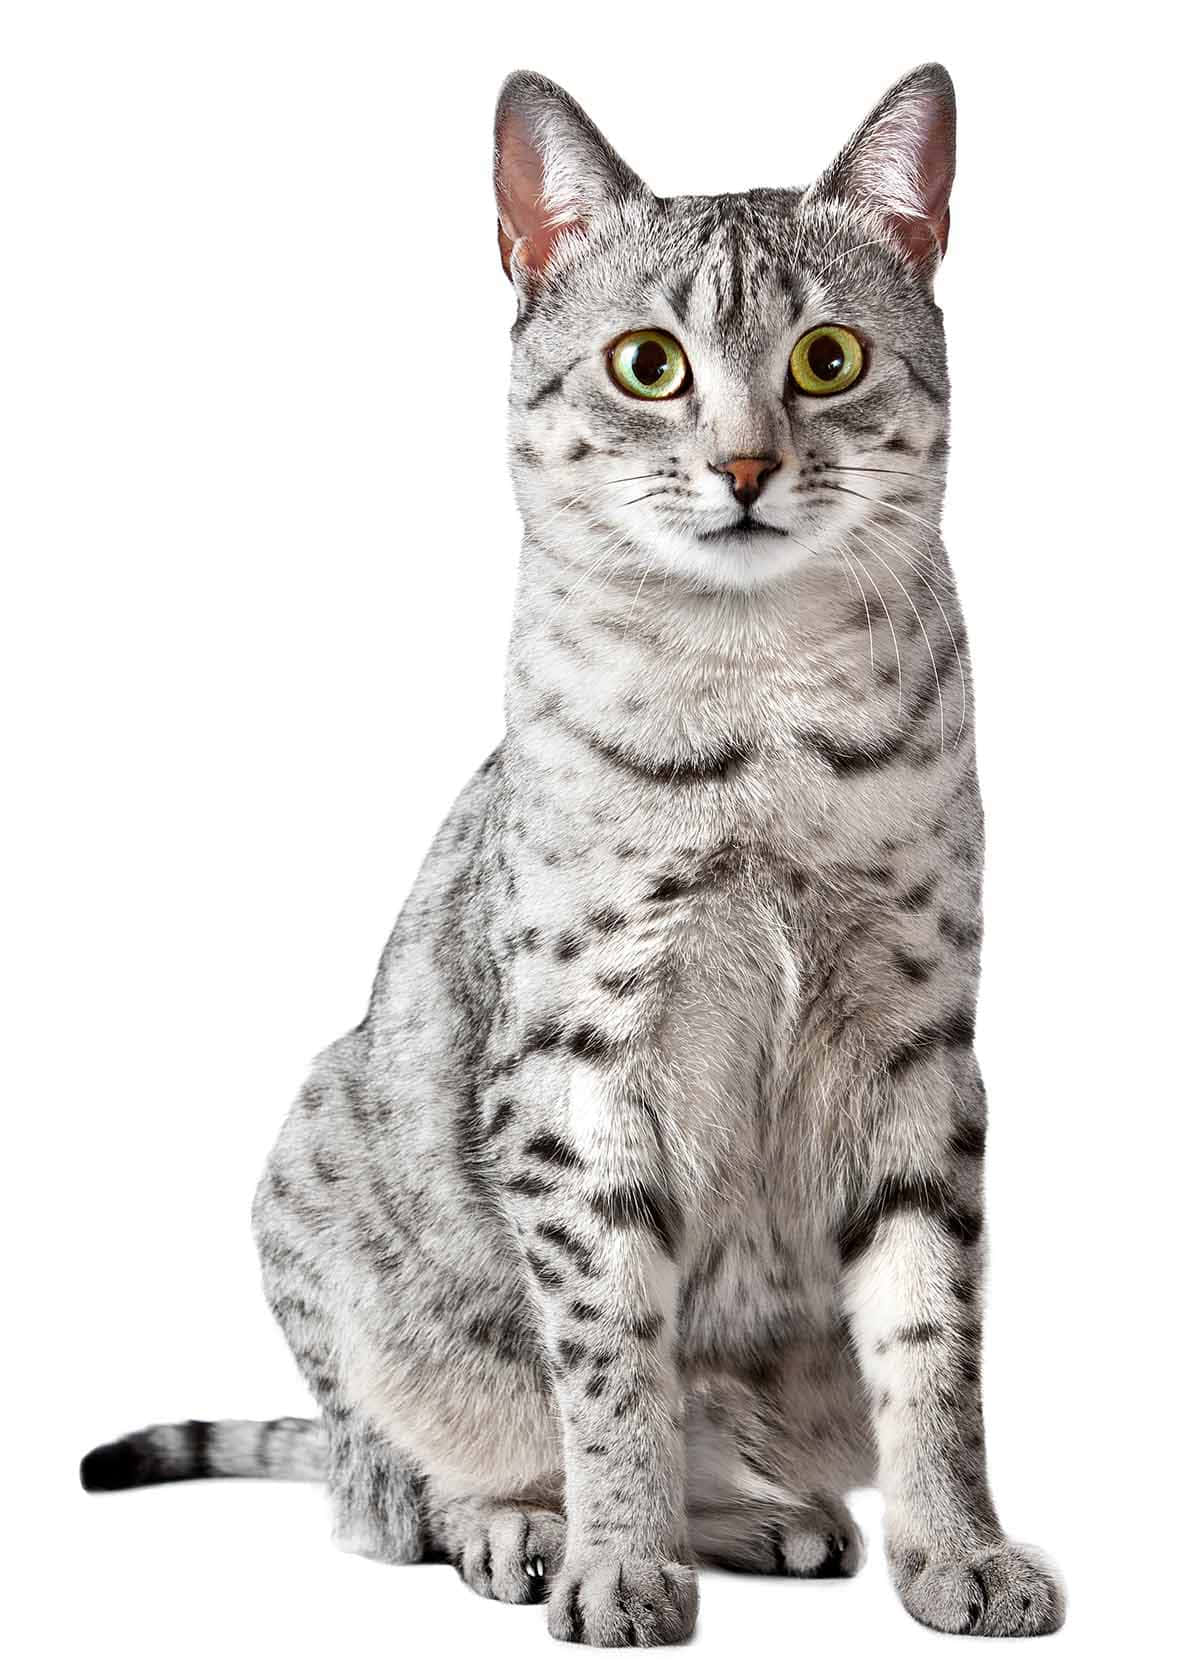 Caption: Stunning Silver Egyptian Mau in Nature Wallpaper